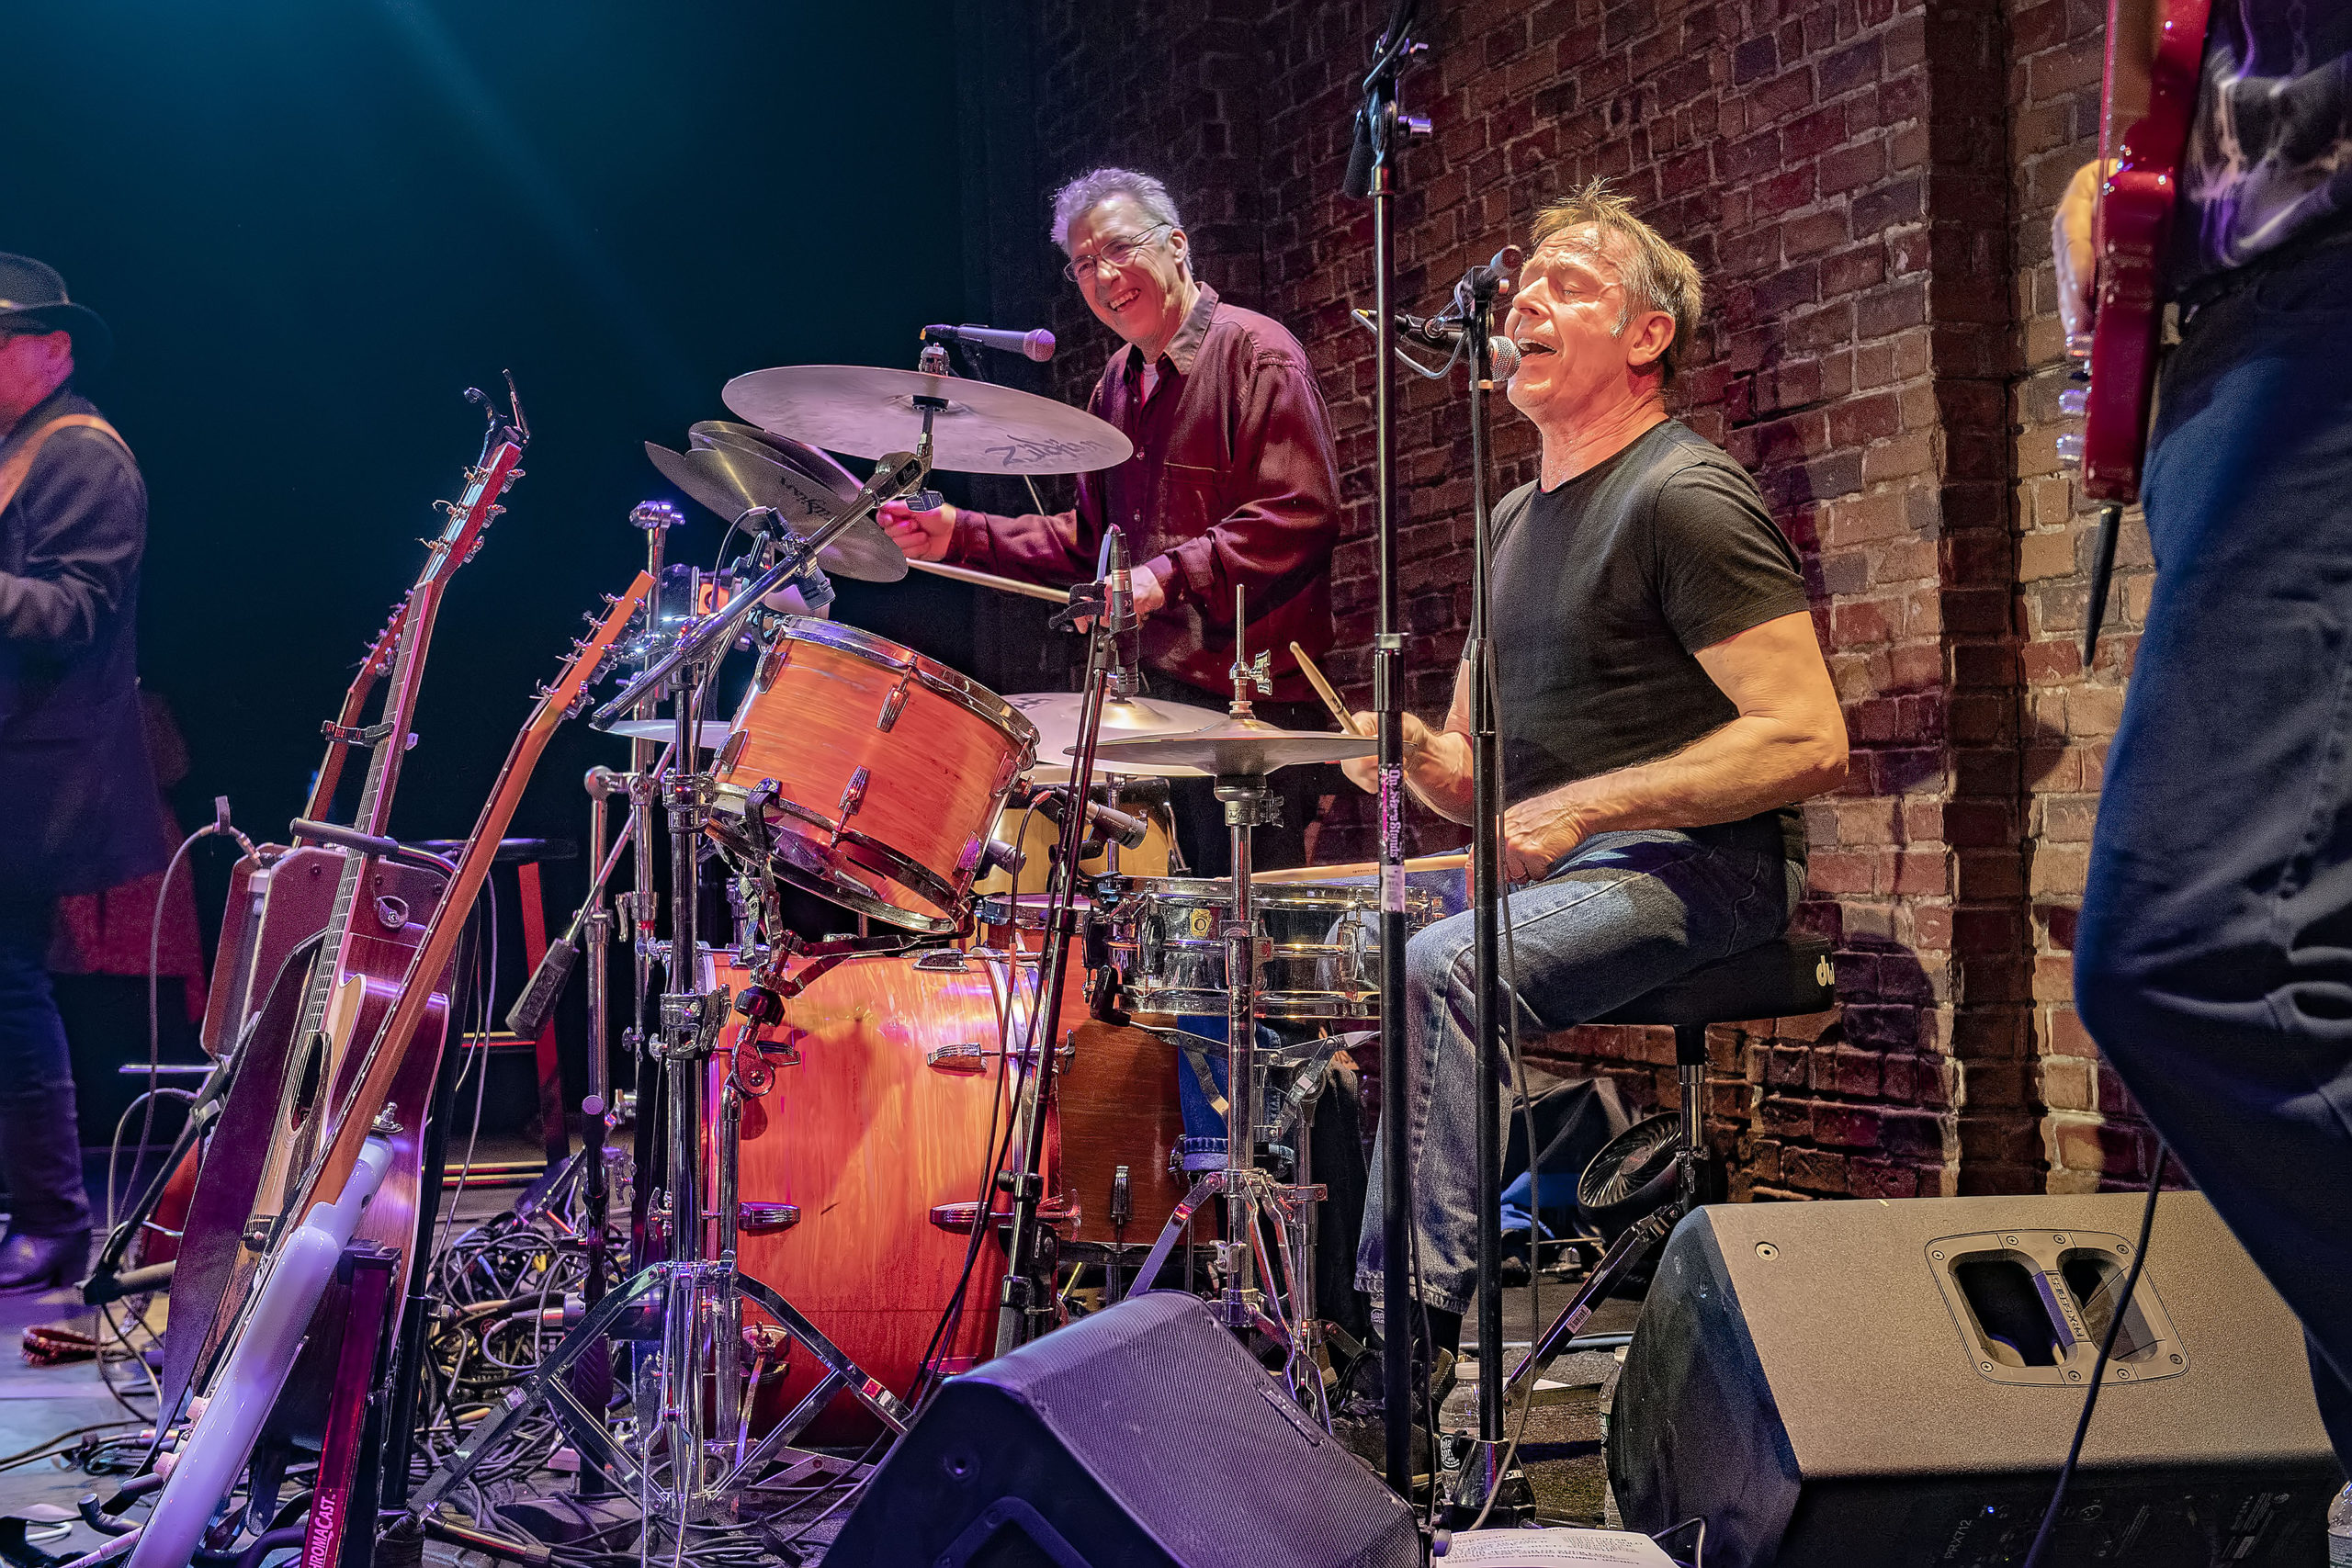 Nancy Atlas's special guest Simon Kirke on the drums at Bay Street Theater on Saturday, January 4, during the first Fireside Session of 2020 .